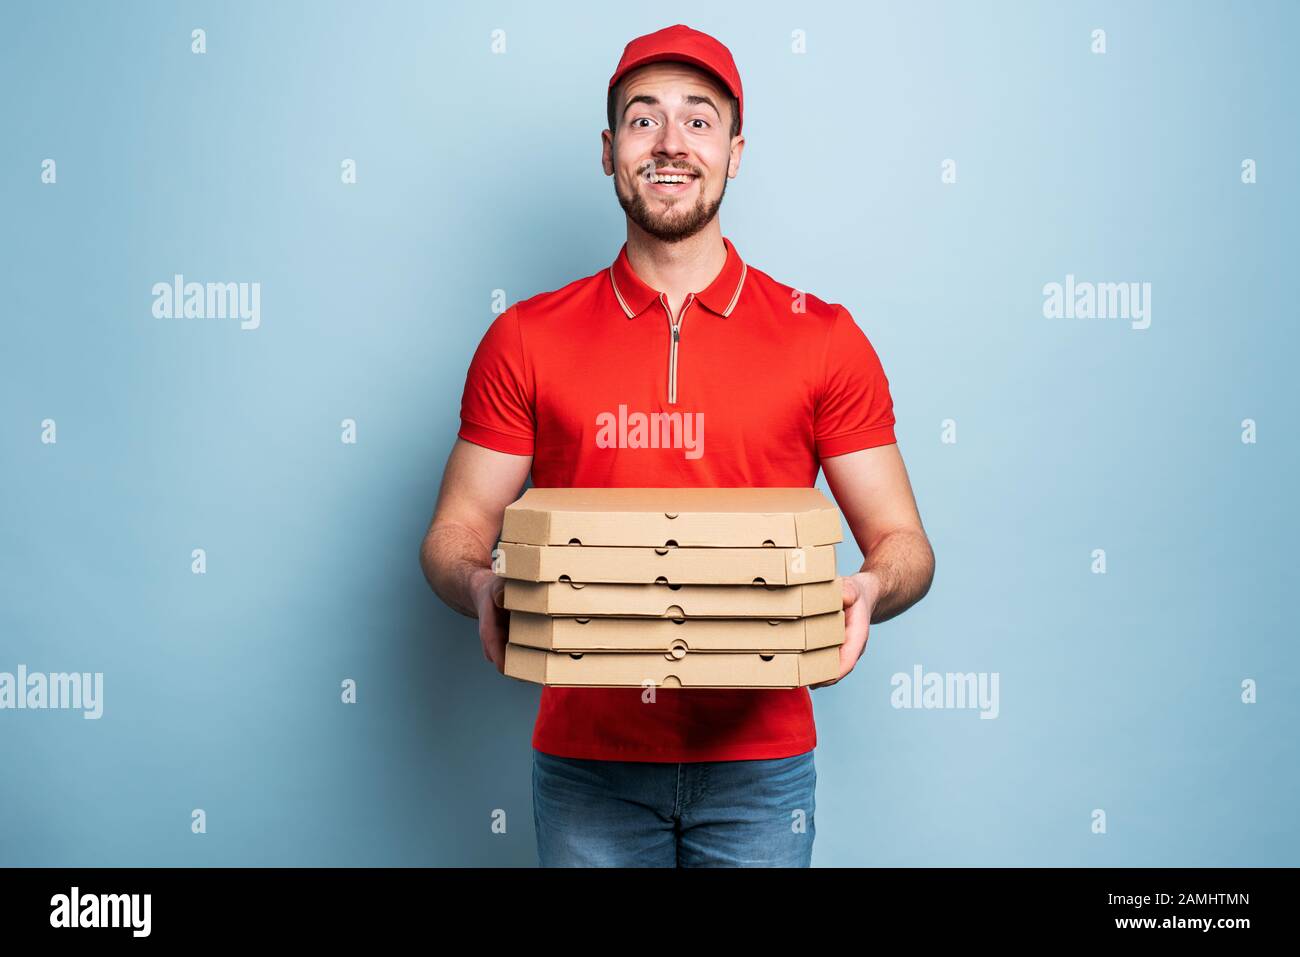 Happy deliveryman happy to delivers pizza with success. Cyan background Stock Photo